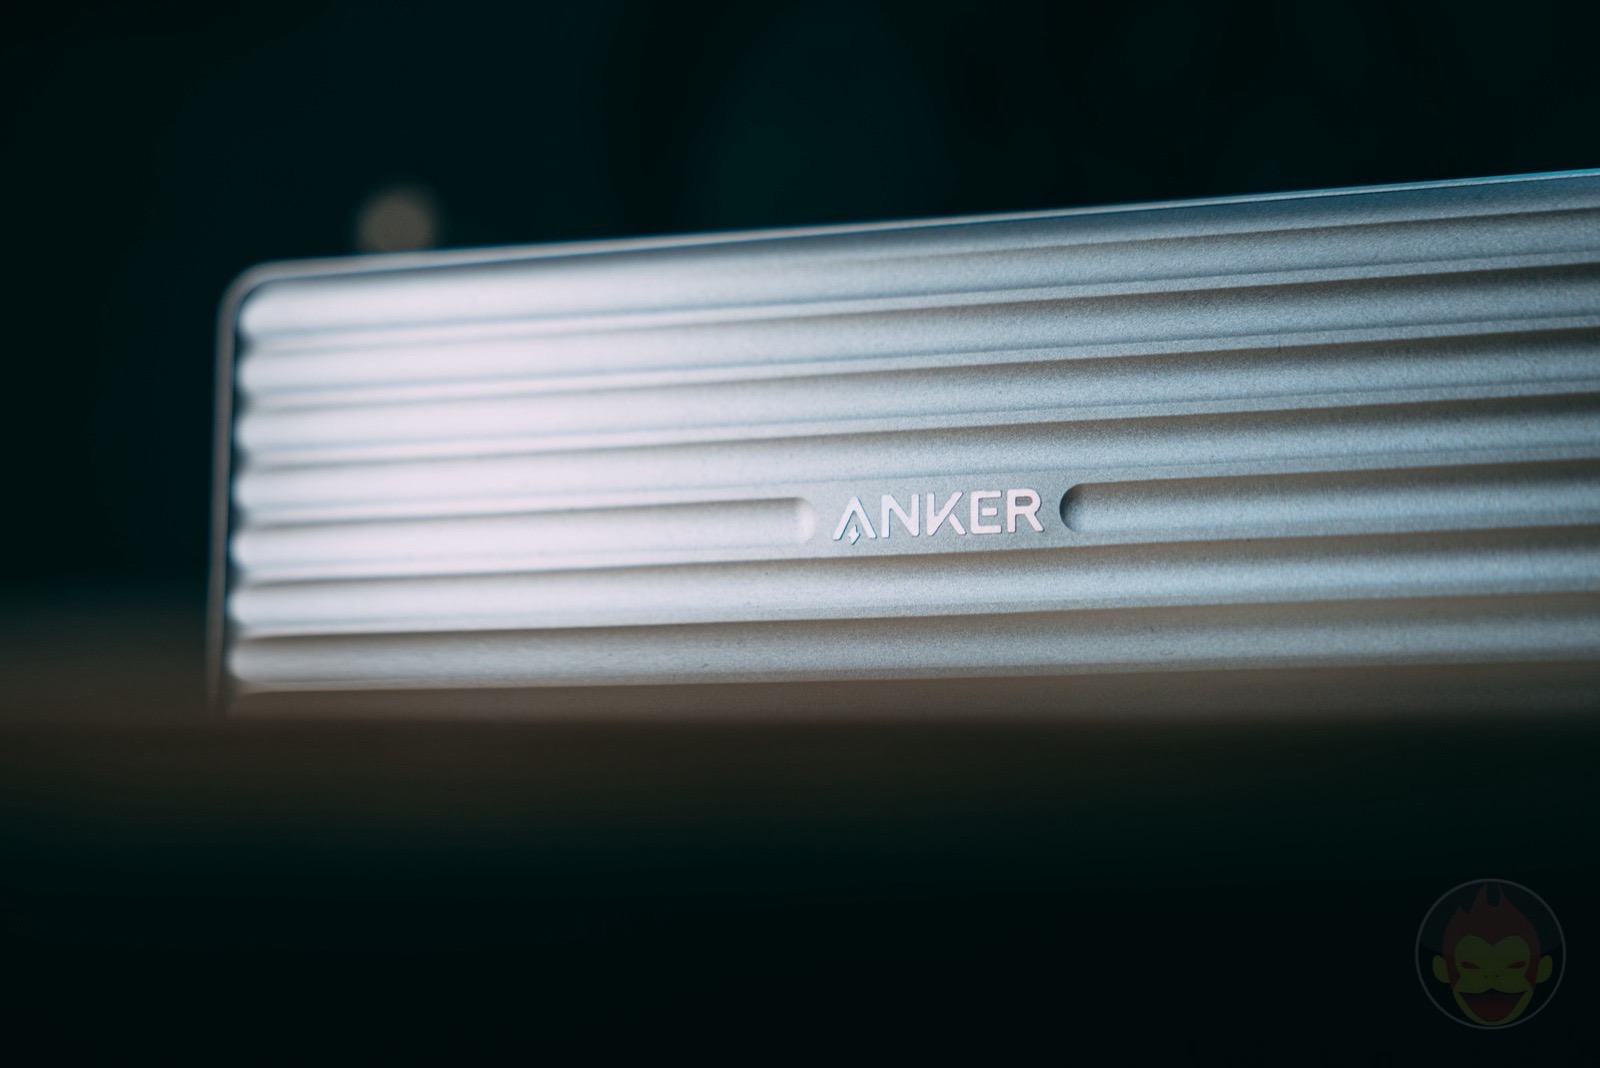 Anker-Products-are-on-sale-02.jpg